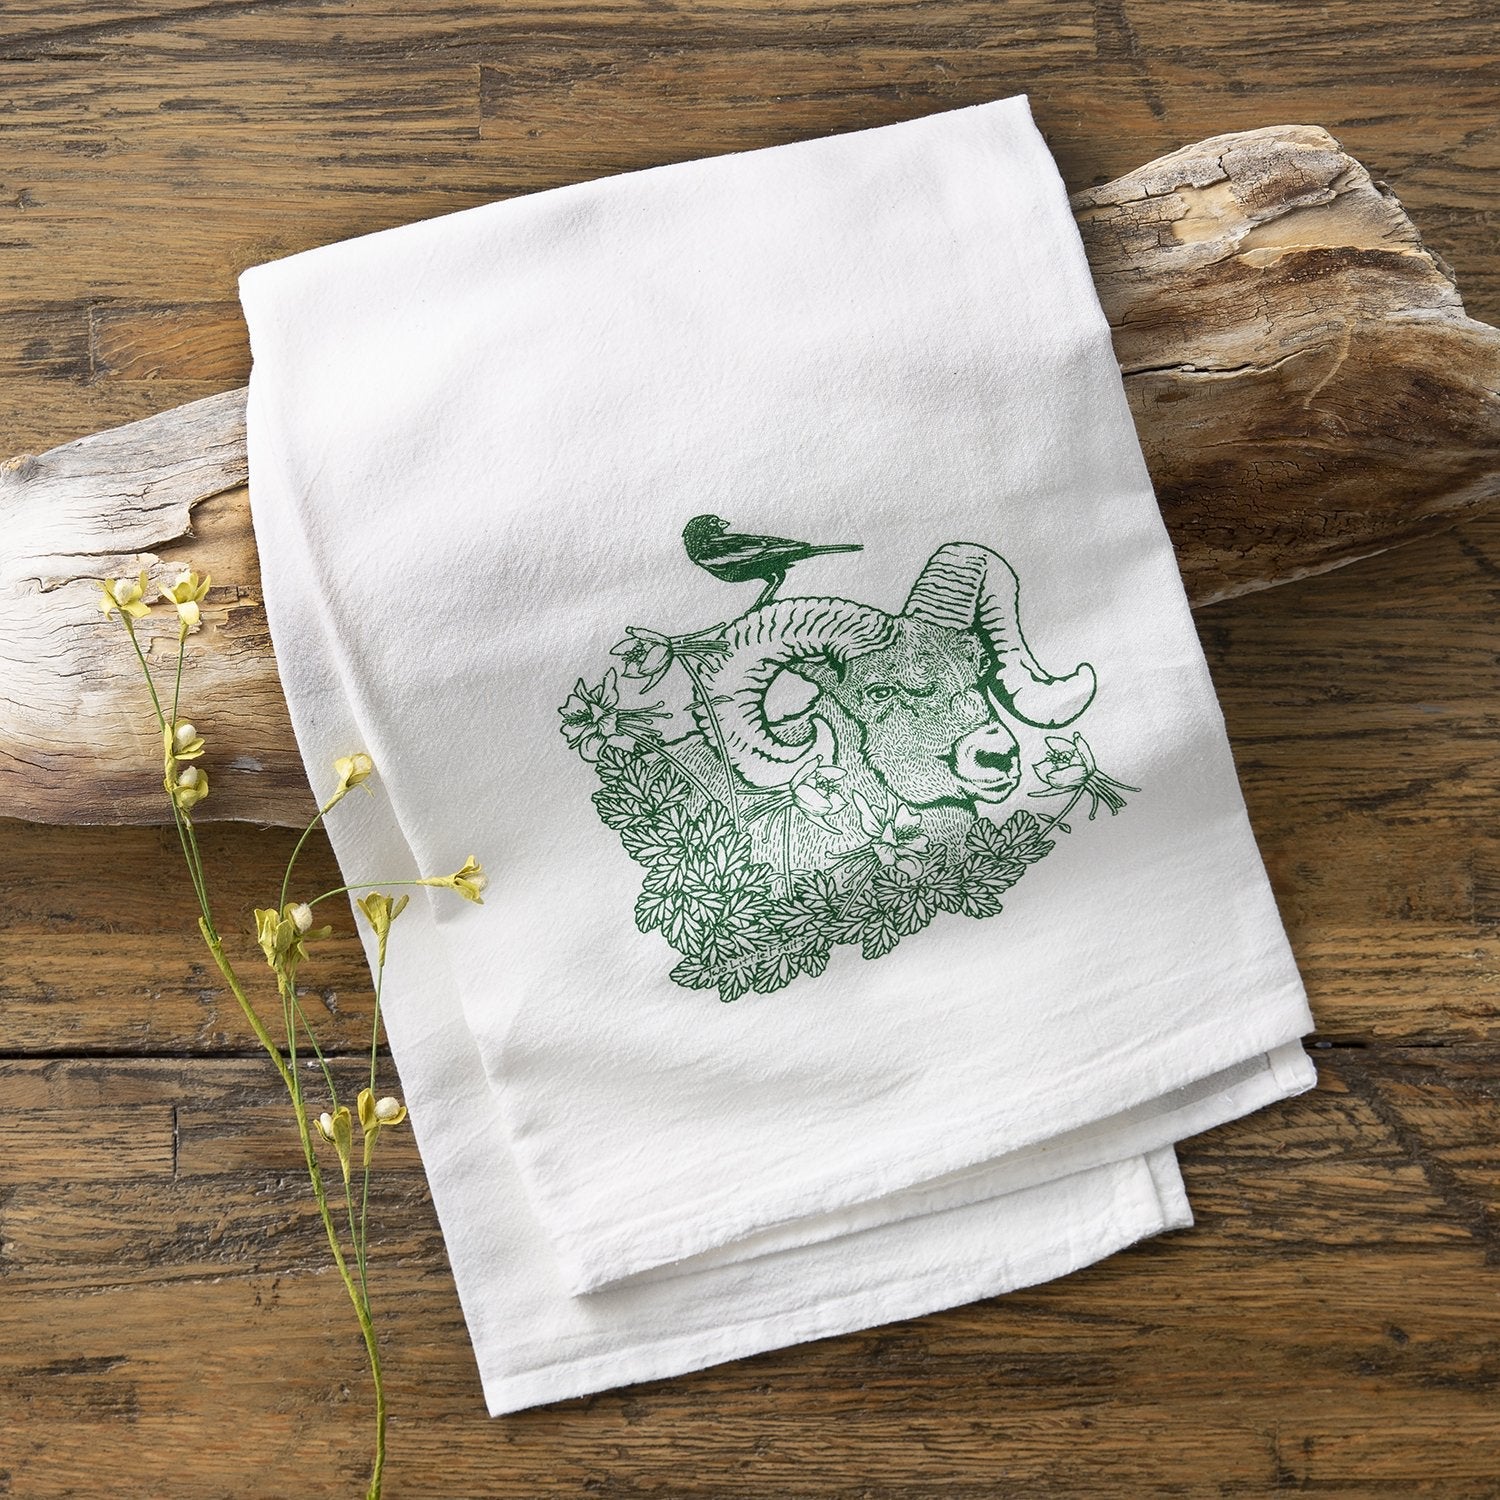 Yellowstone Kitchen Towel Set - Tea Towels - Two Little Fruits - Two Little Fruits